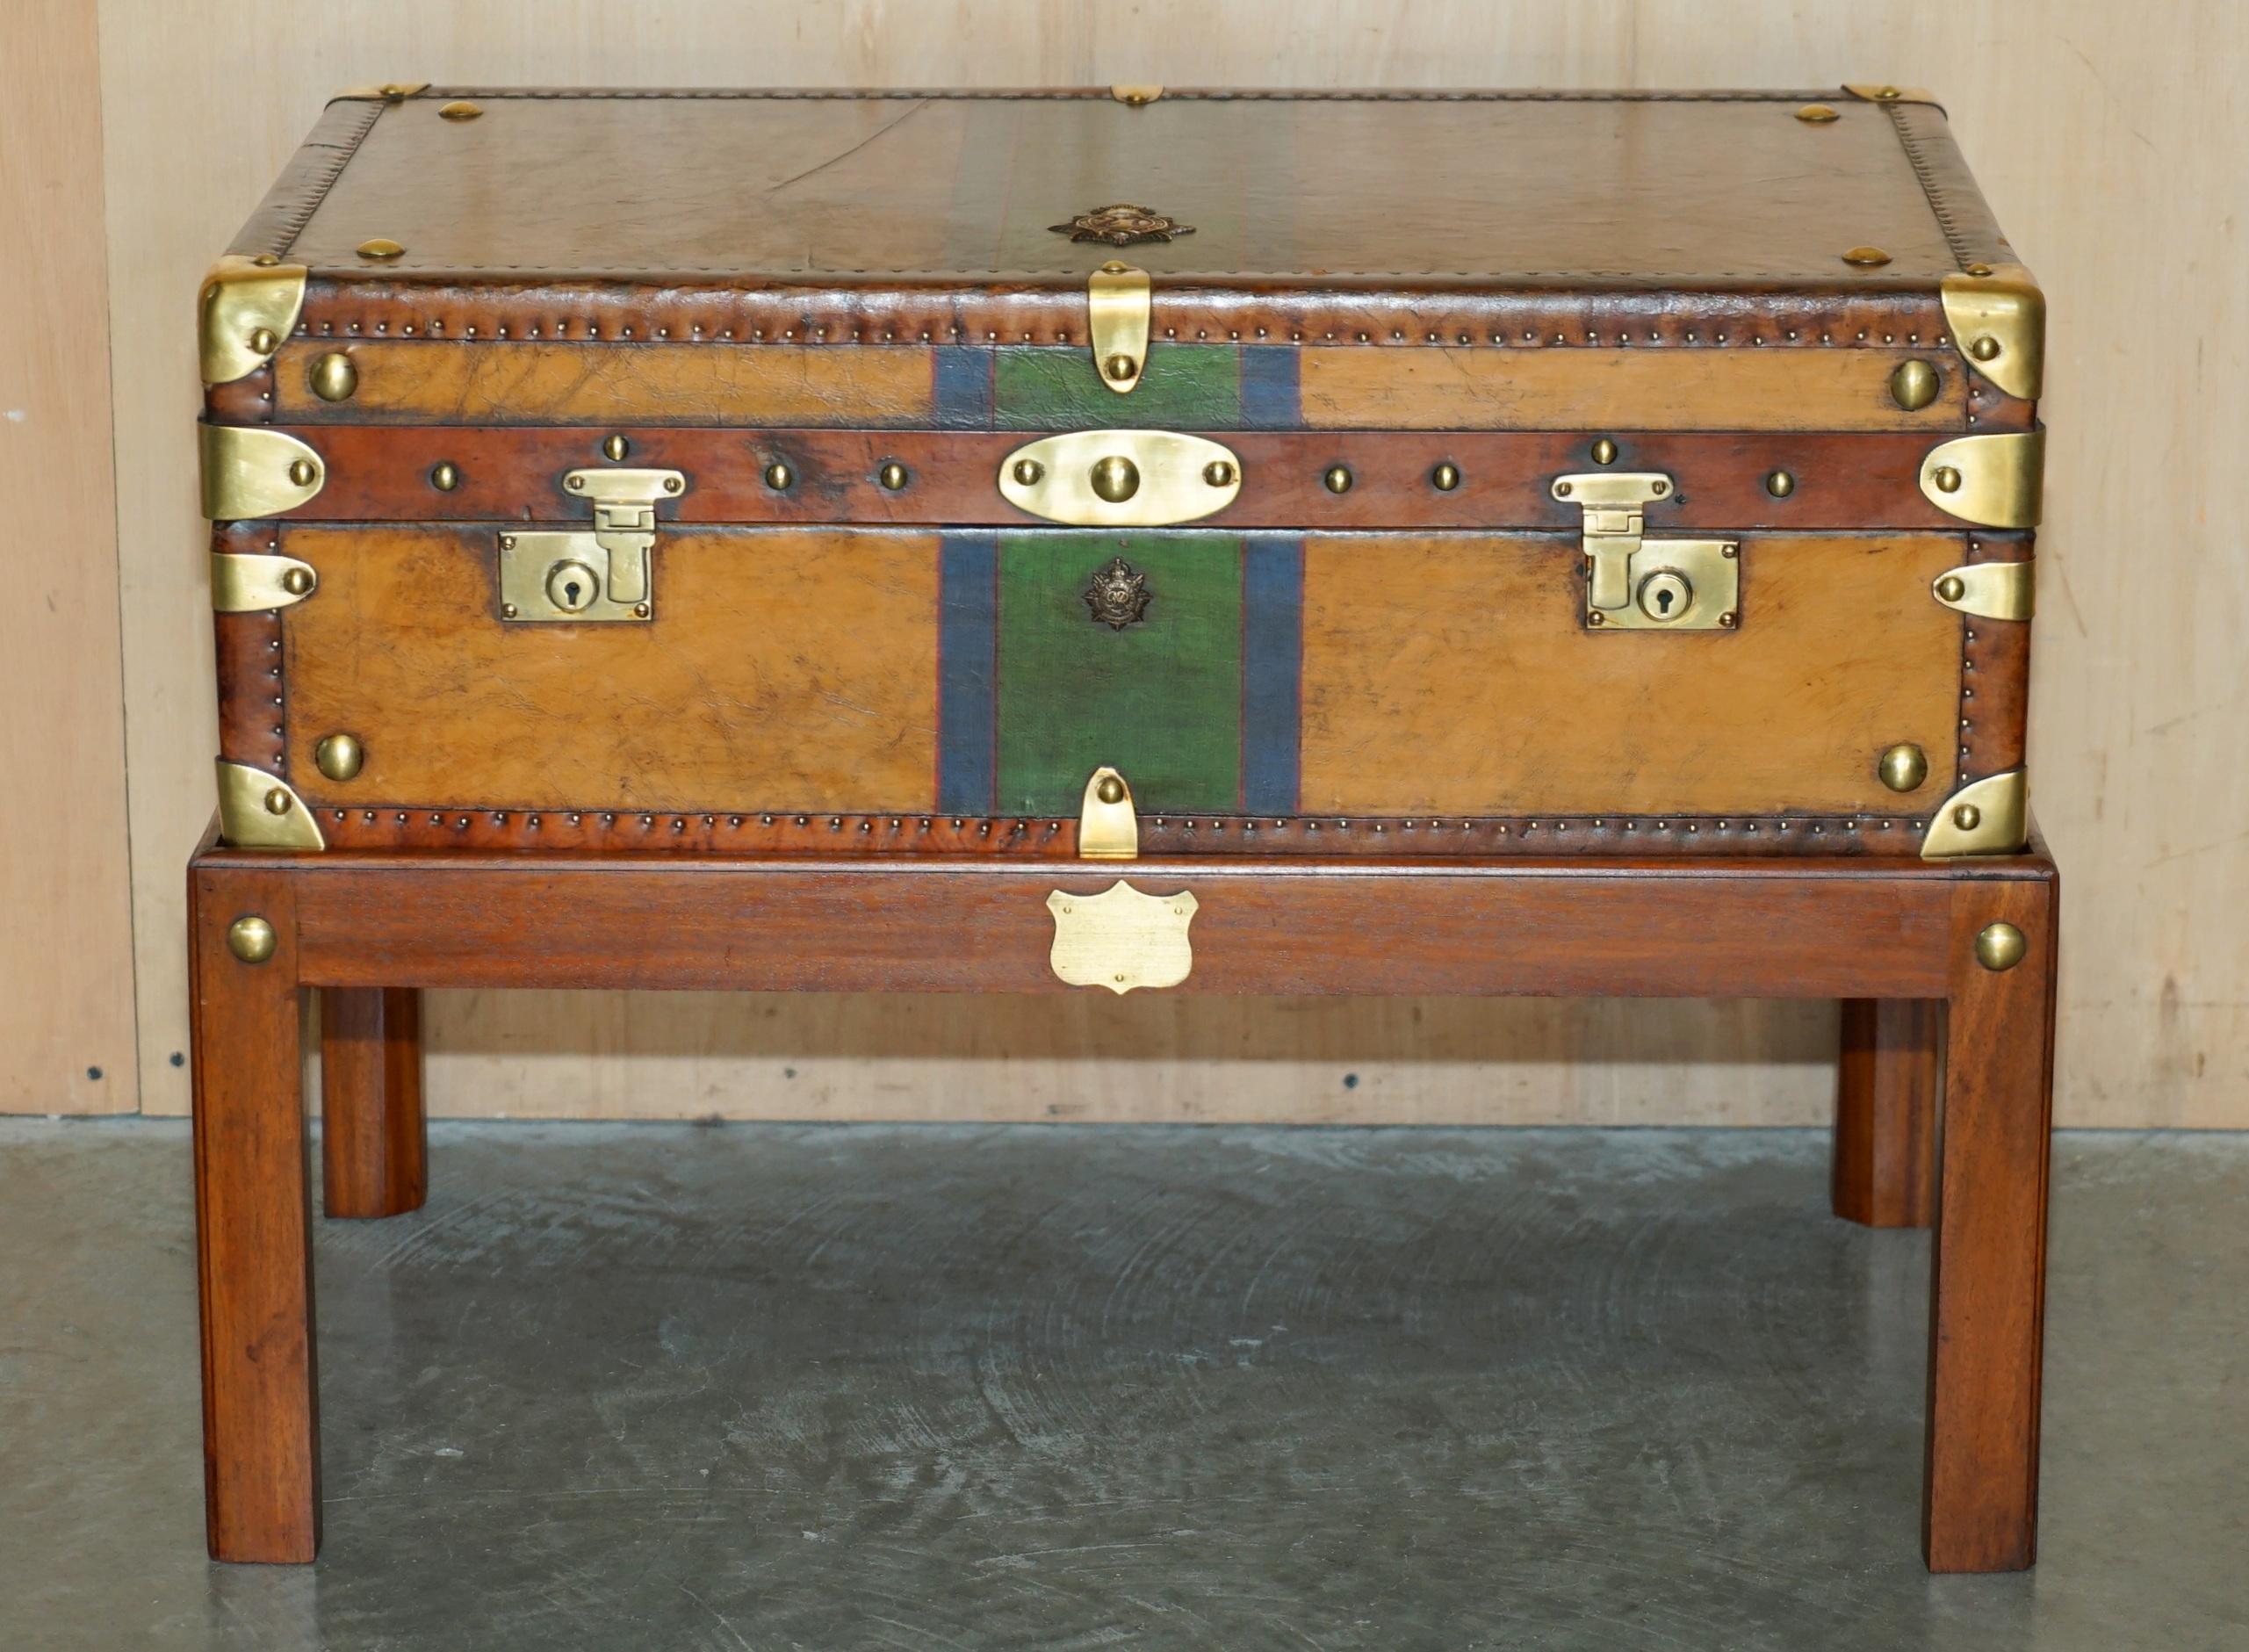 Brass RESTORED BRITISH ARMY BROWN LEATHER TRUNK COFFEE TABLE HONI SOIT QUI MAL Y PENSe For Sale